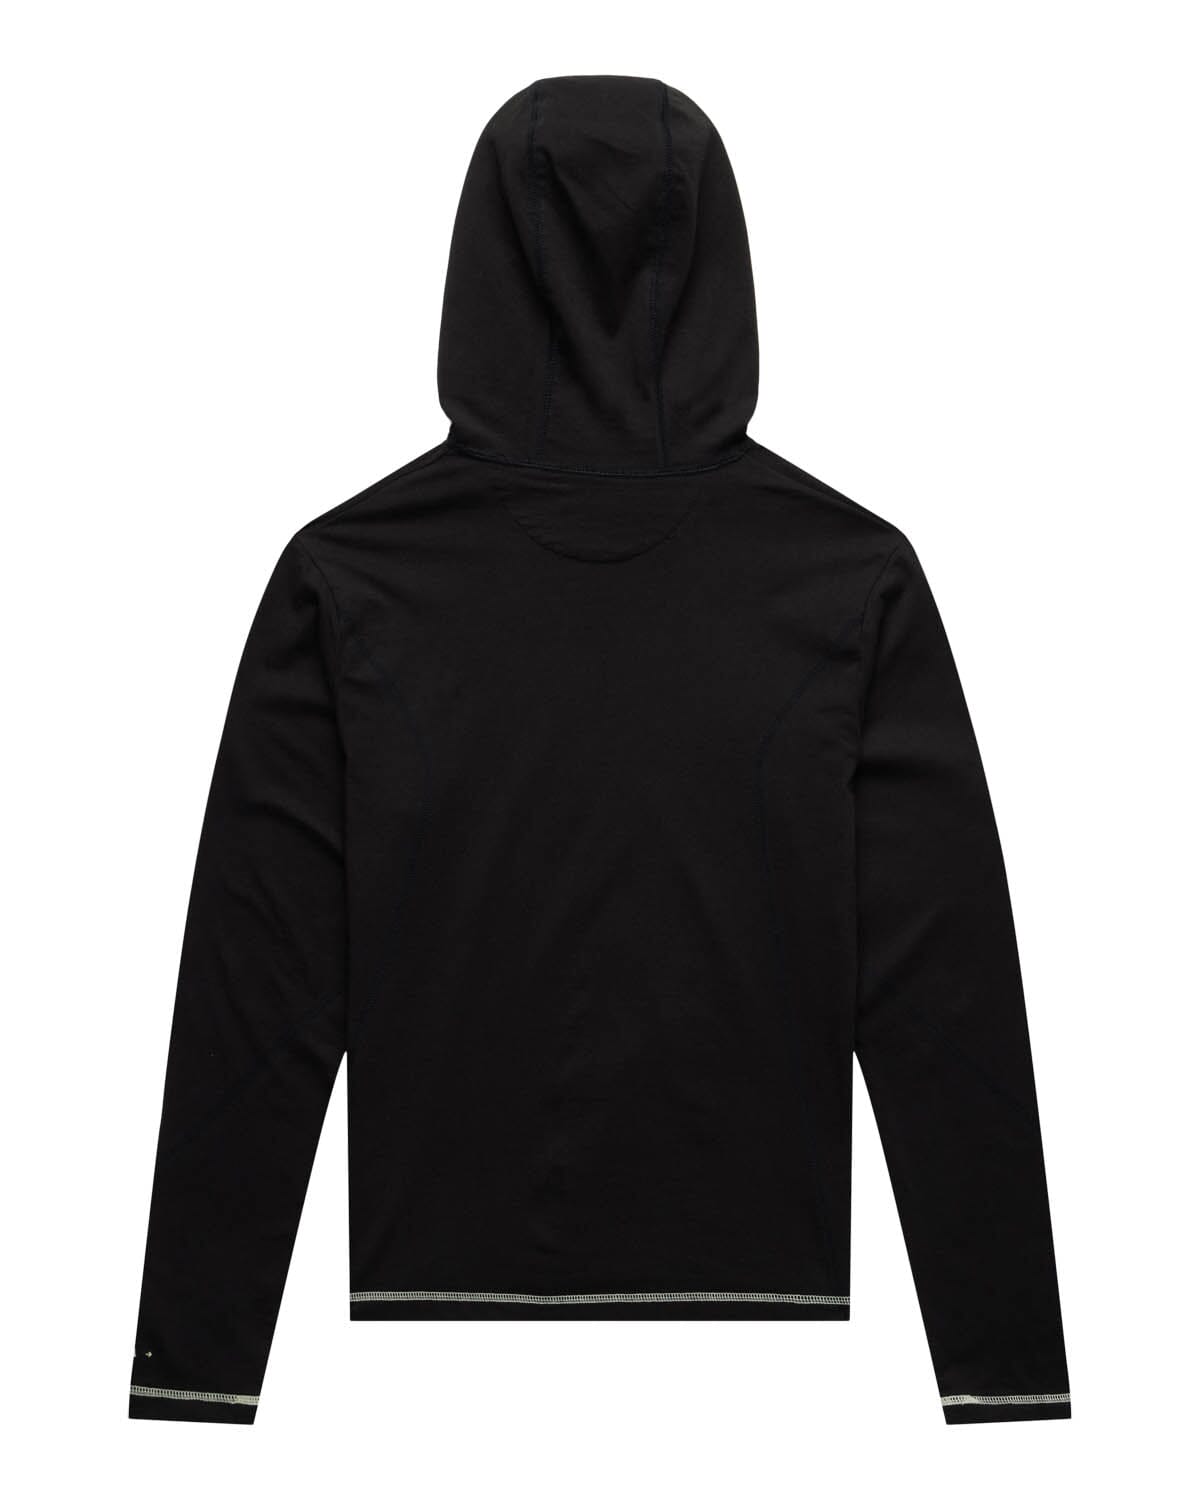 ST STATIC HOODED LS BLK HOODED LS ST STATIC 